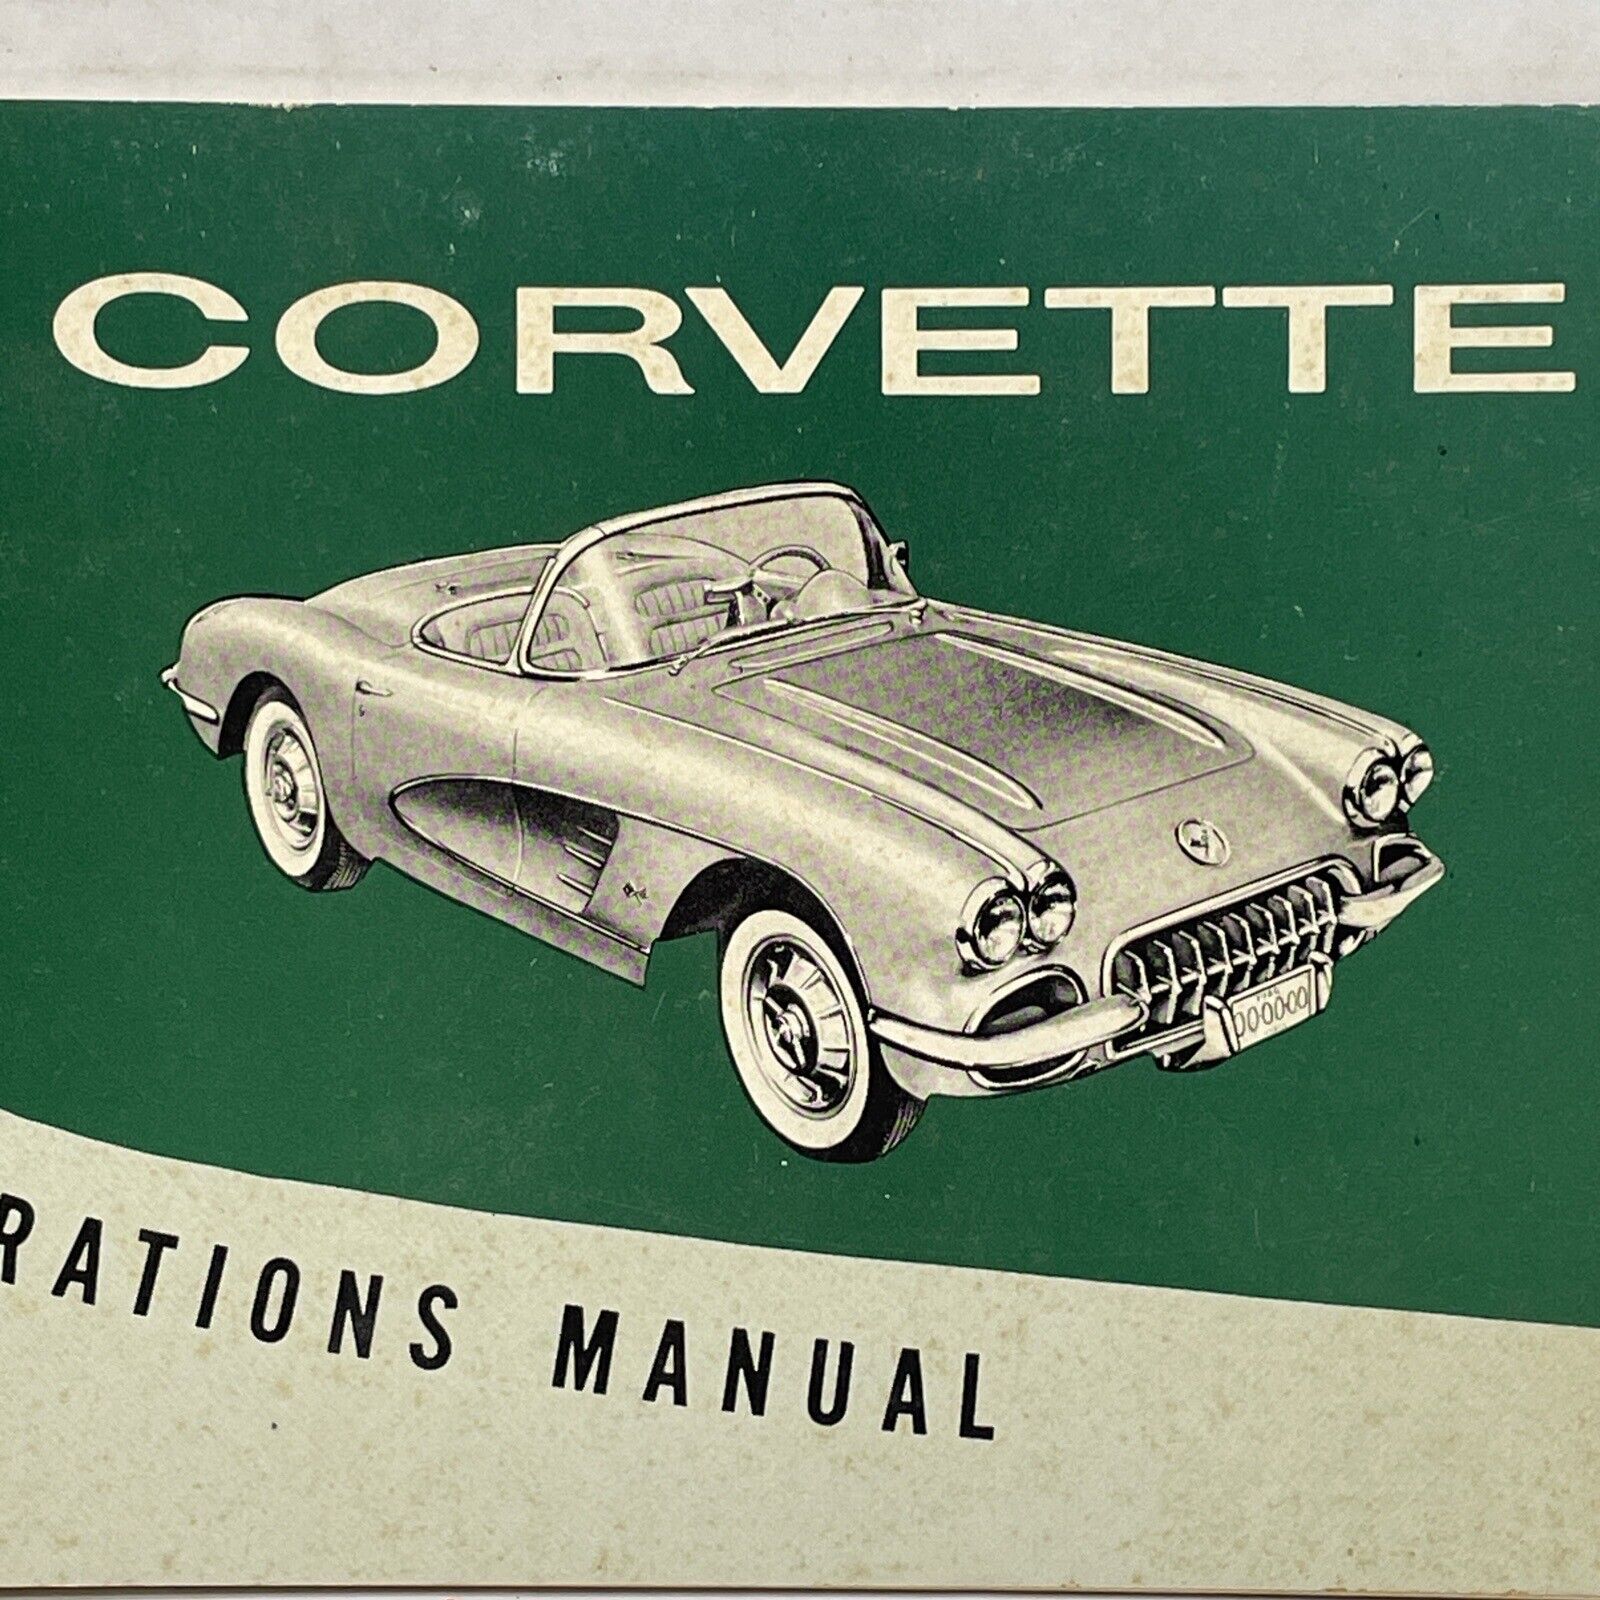 1960 Corvette Original Operations Manual 2nd Edition with Subscription Card